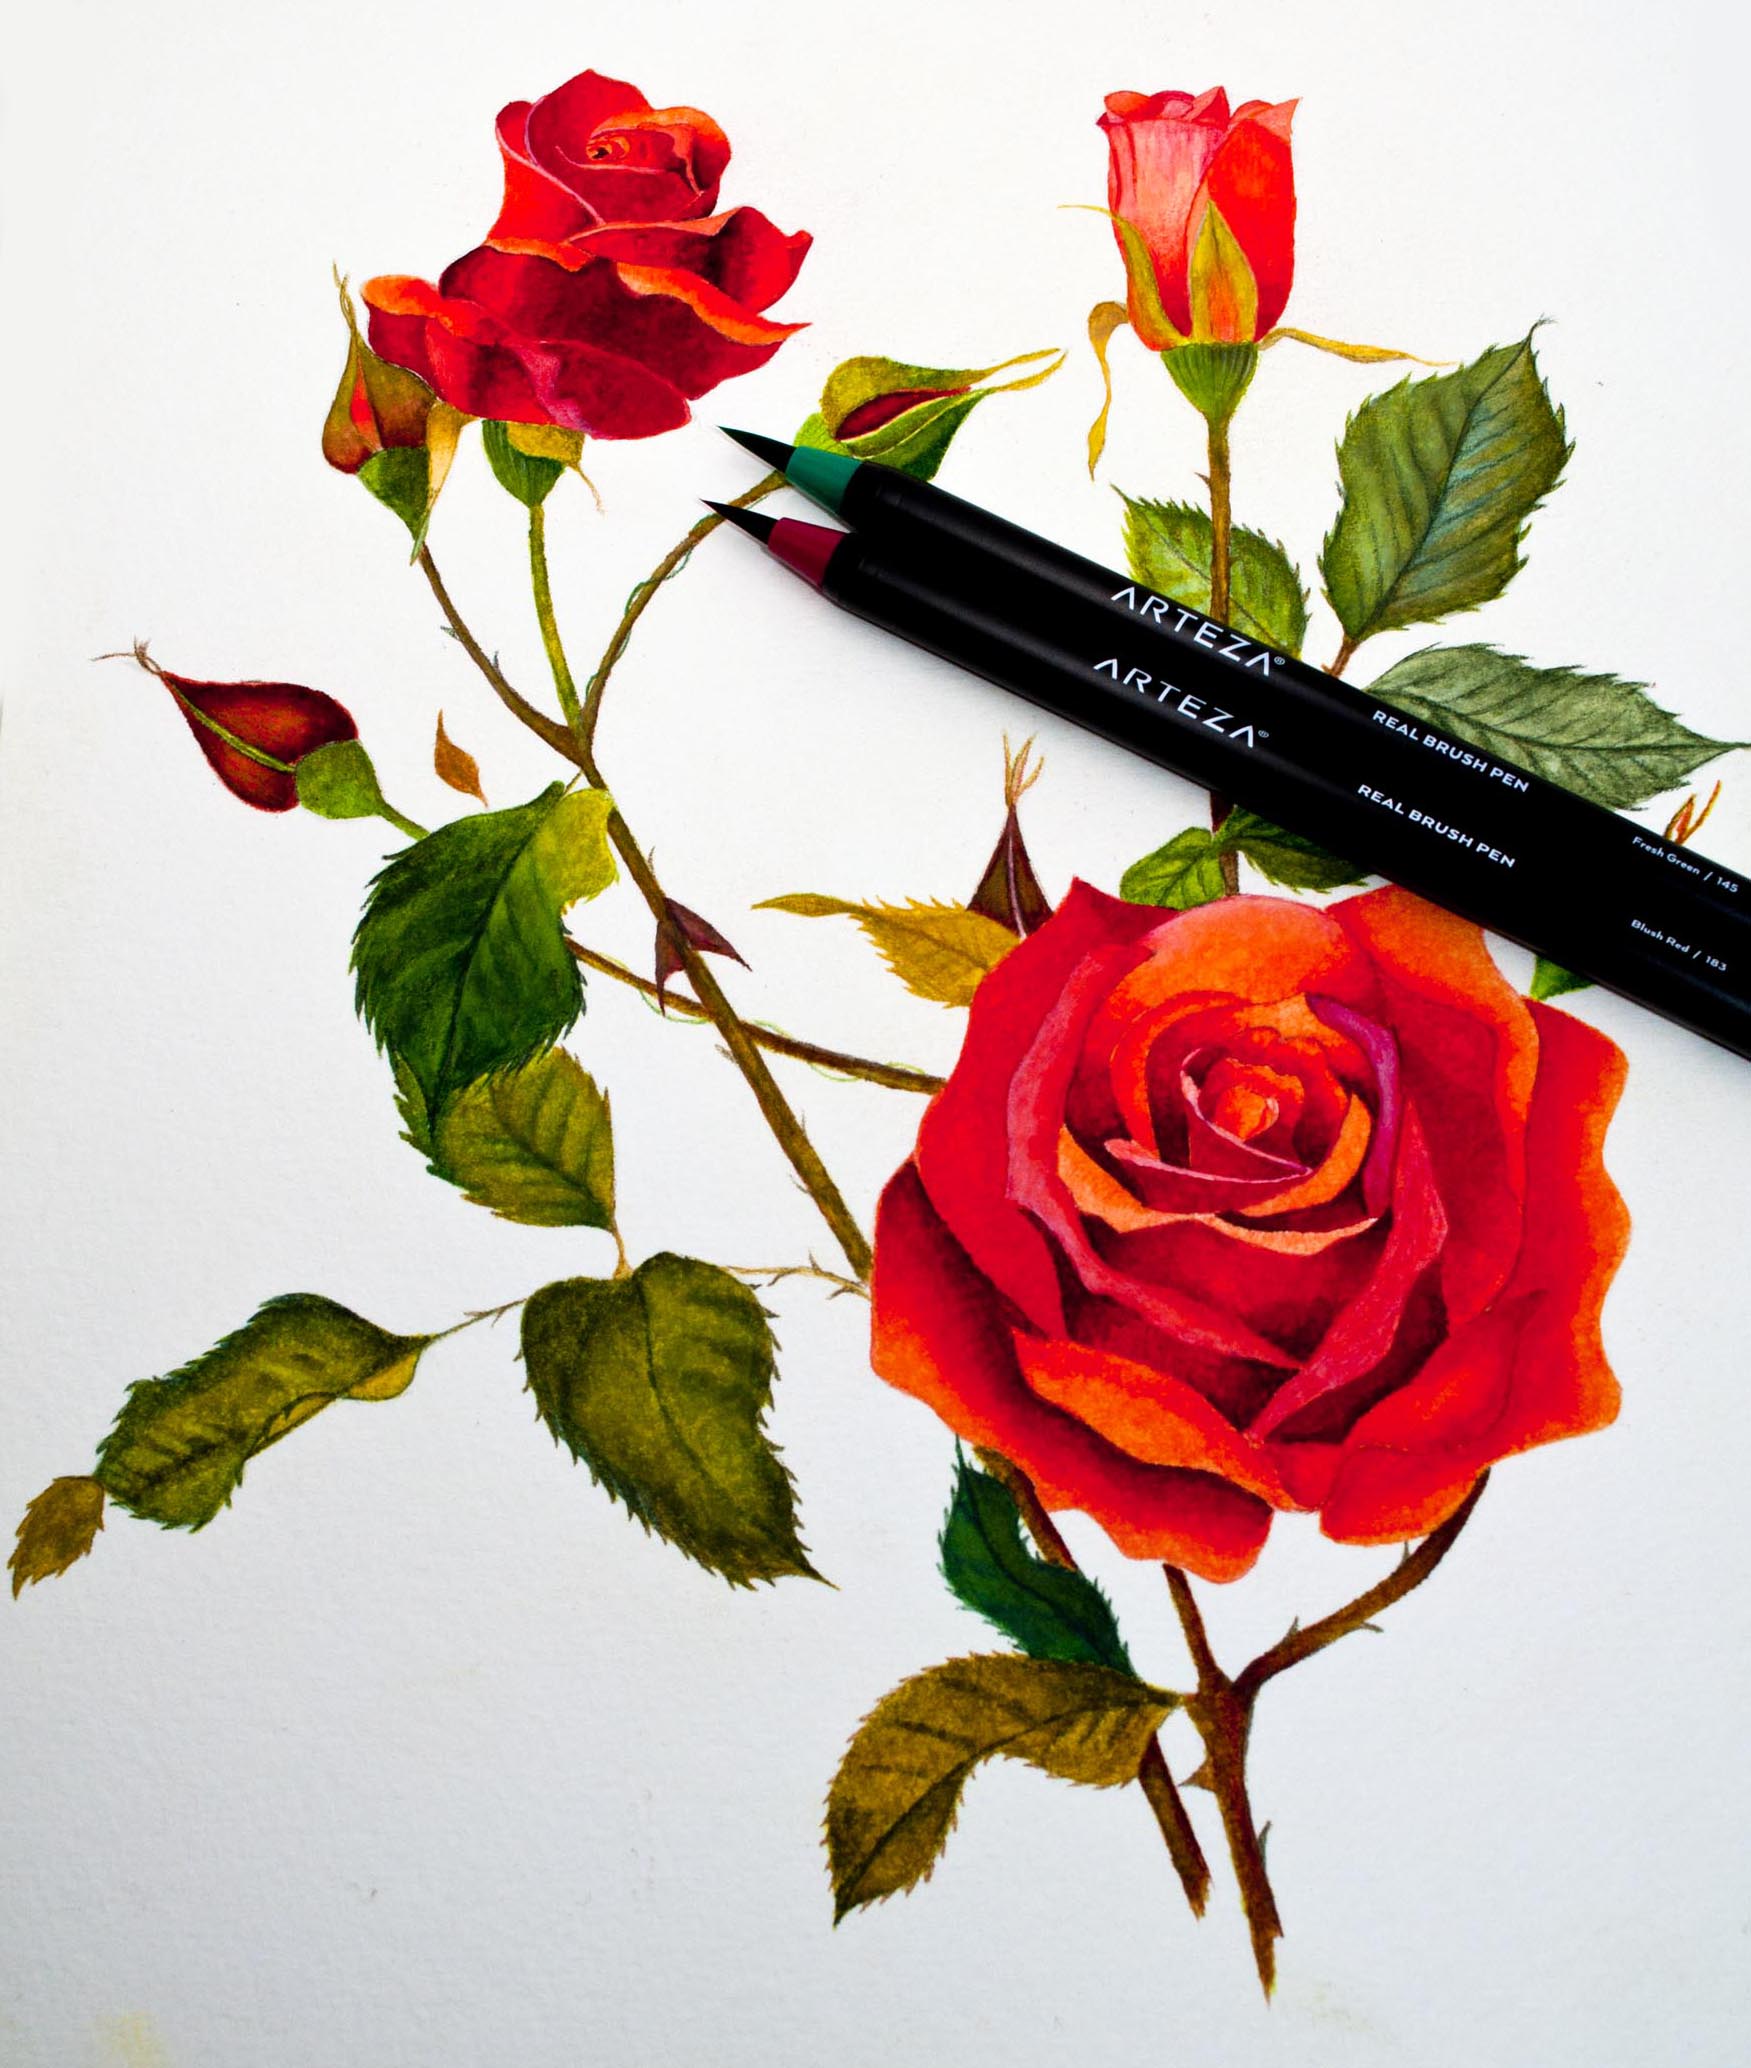 How to watercolor with ARTEZA Real Brush Pens 